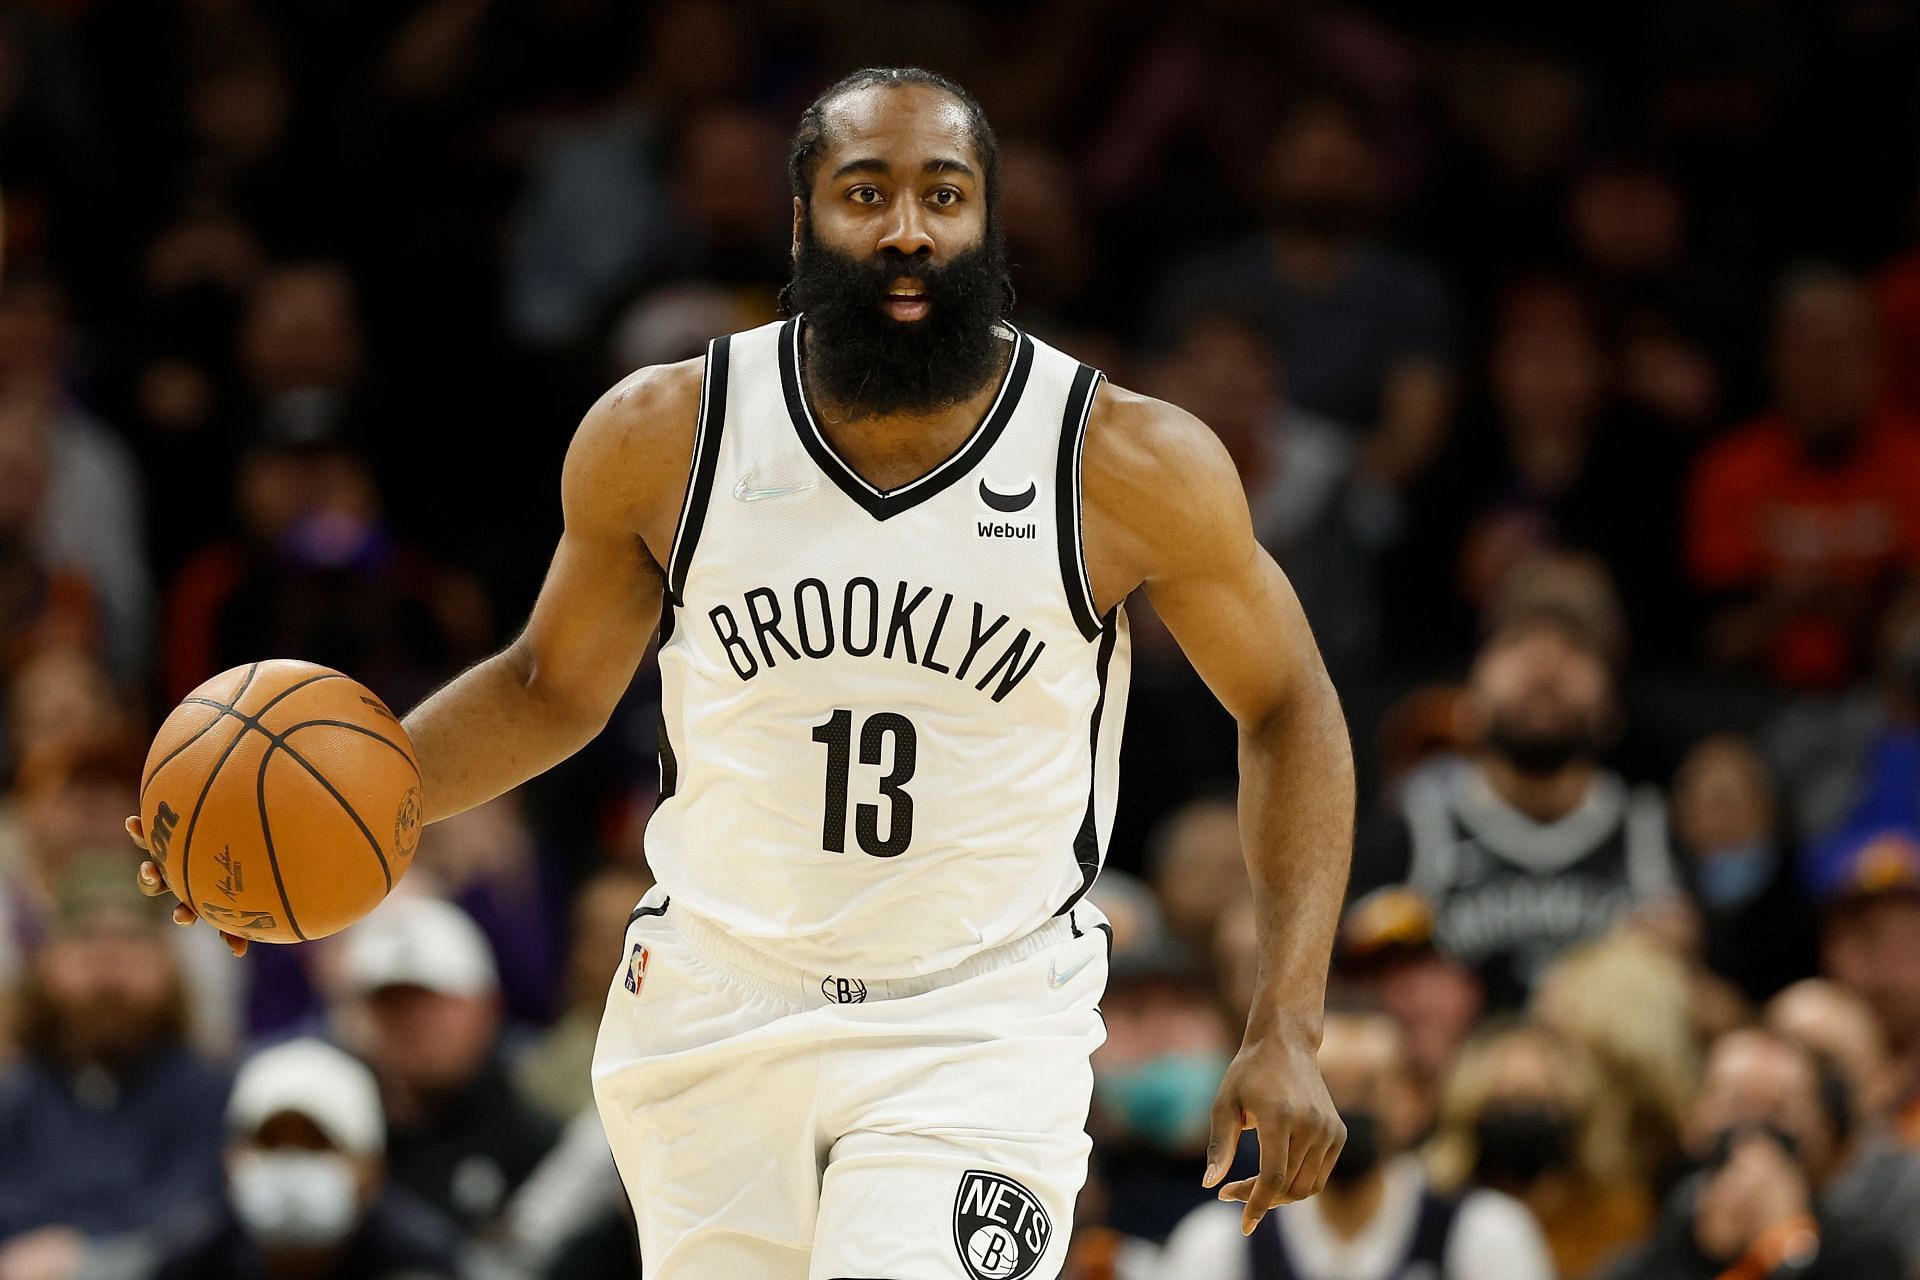 James Harden scored just 4 points as the Brooklyn Nets suffered their sixth successive defeat on Wednesday